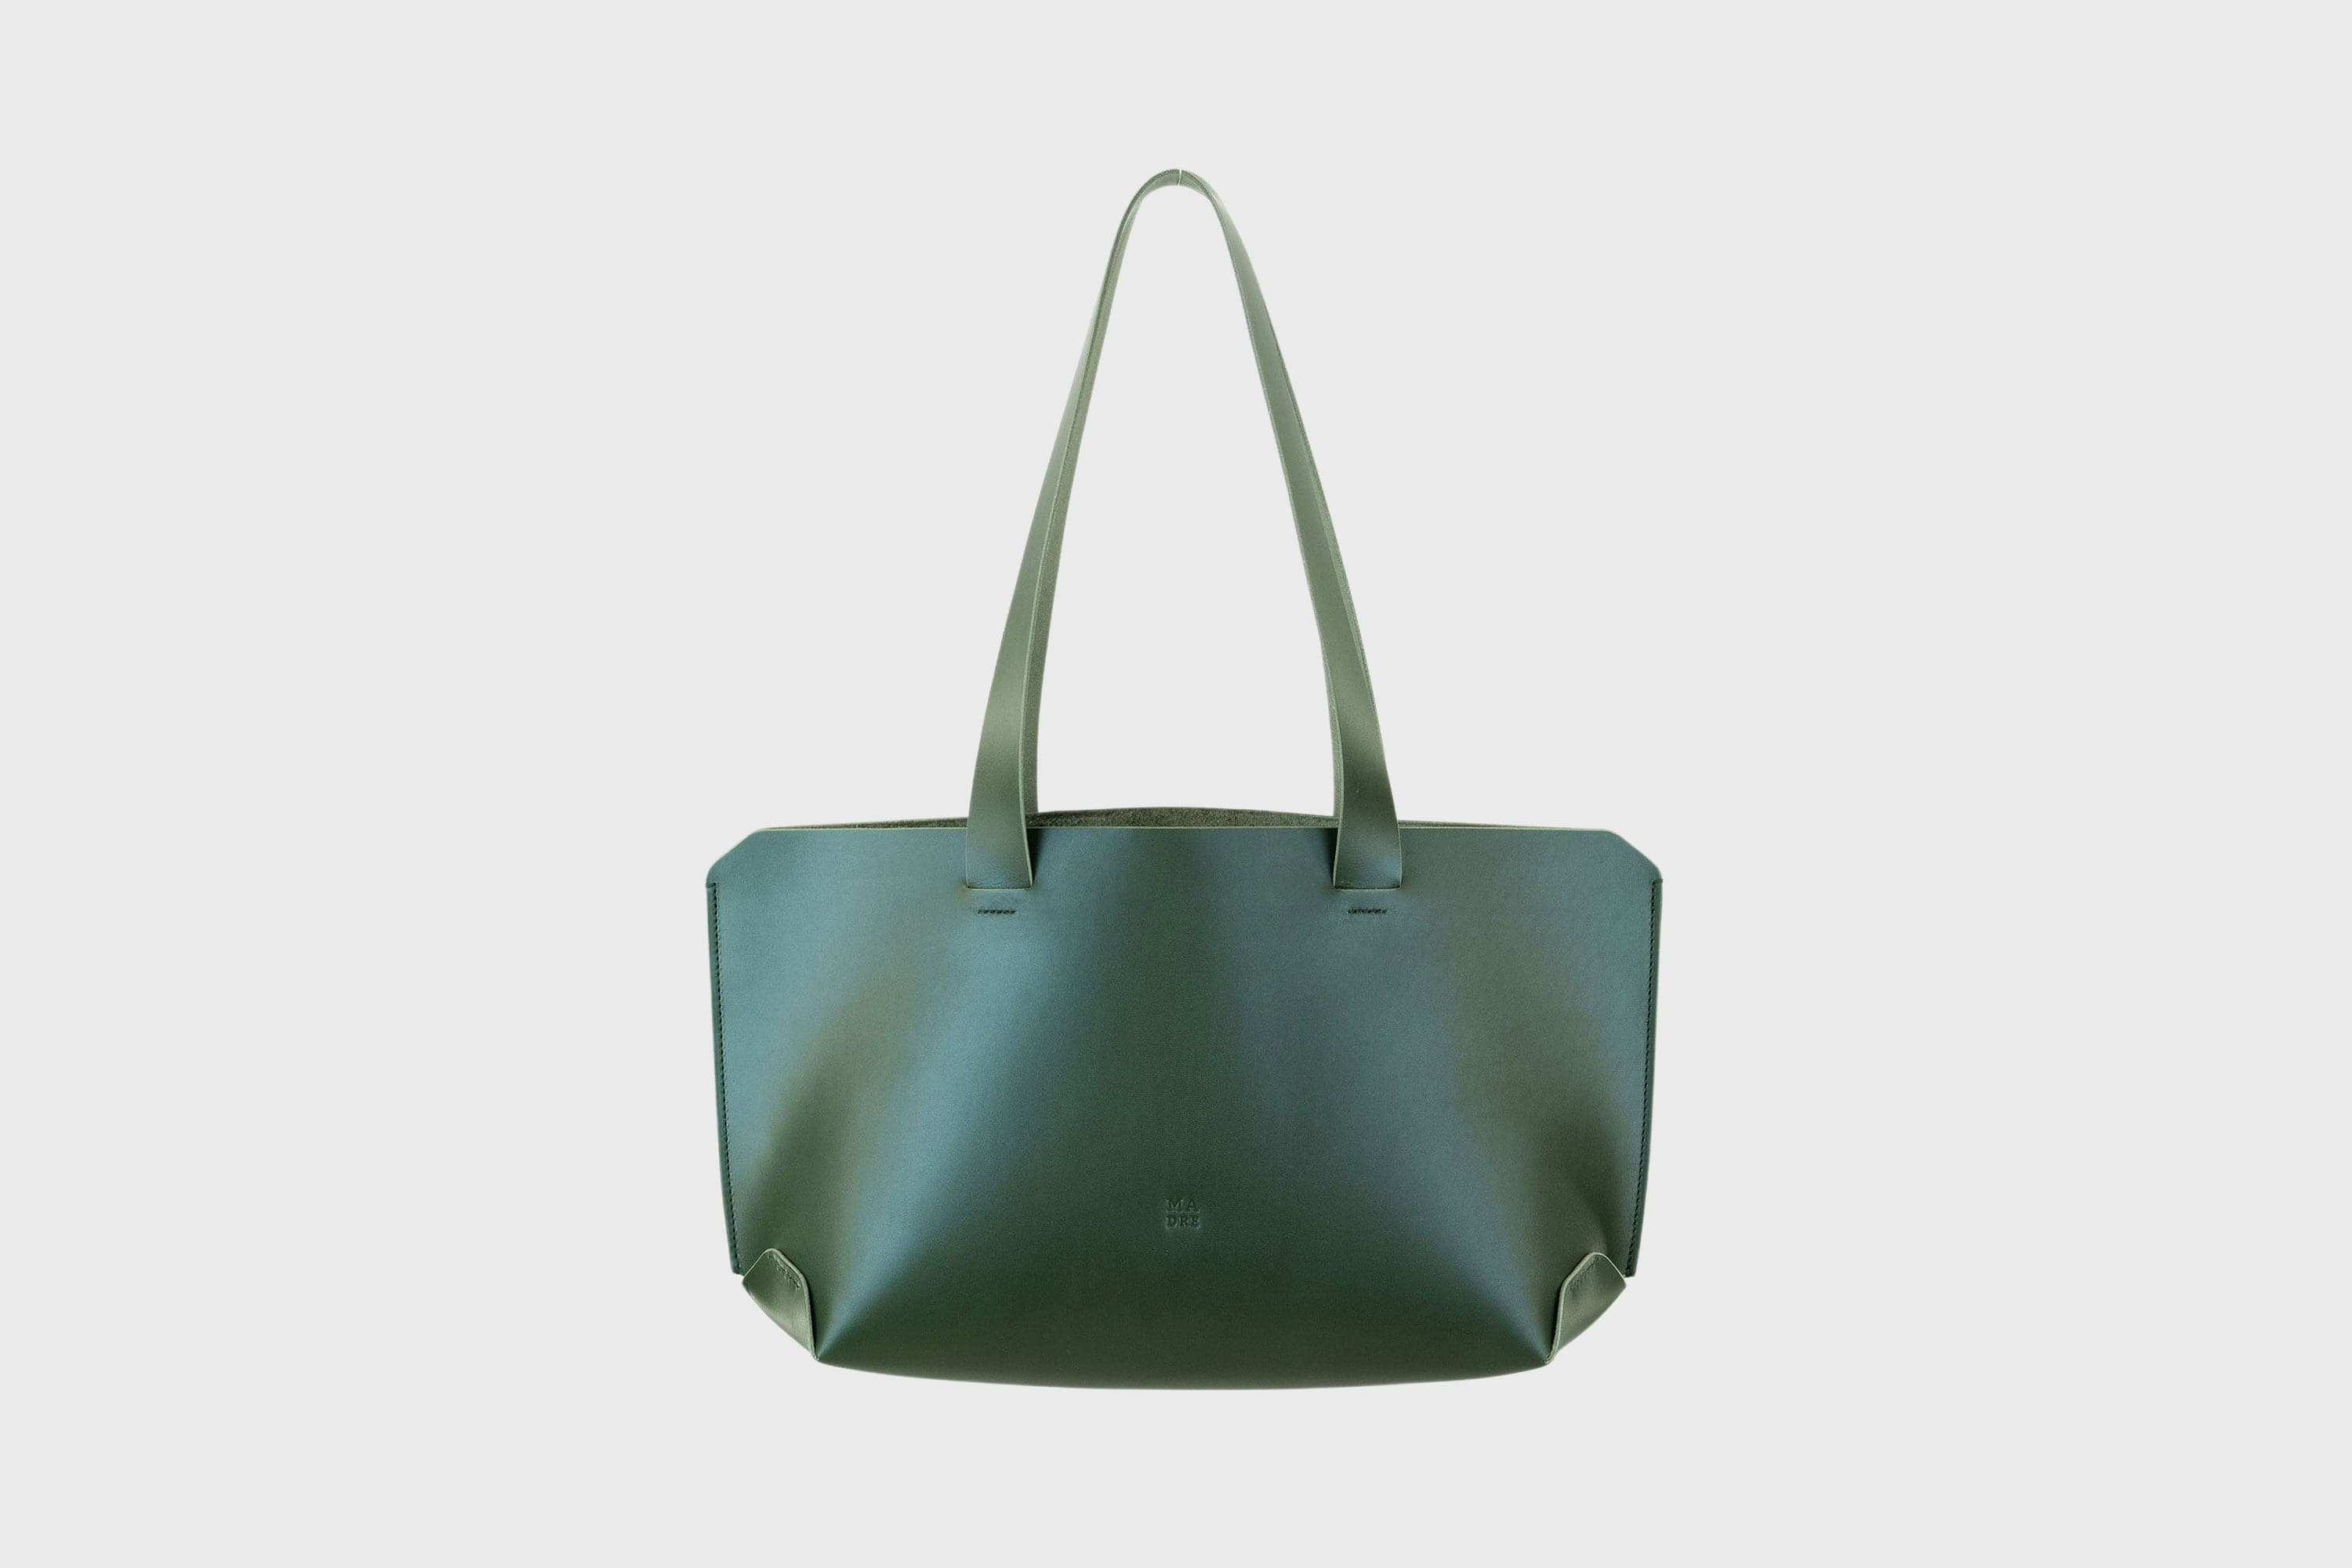 Tote Bag Olive Green Vegetable Tanned Leather Handmade Quality Design By Manuel Dreesmann Atelier Madre Barcelona Spain